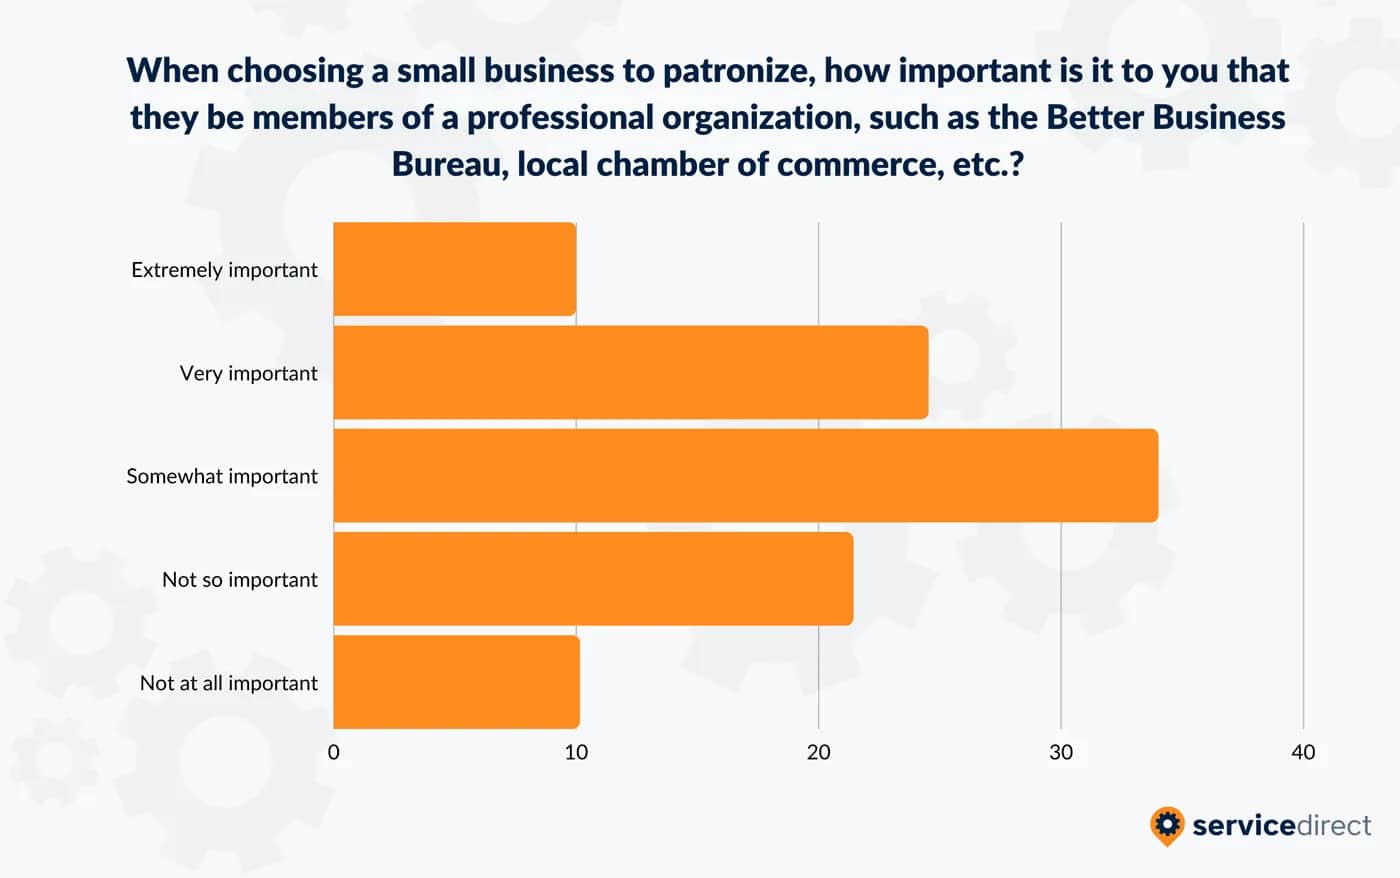 69% of consumers report that membership in local groups or organizations is important to them when choosing a small business to patronize. 